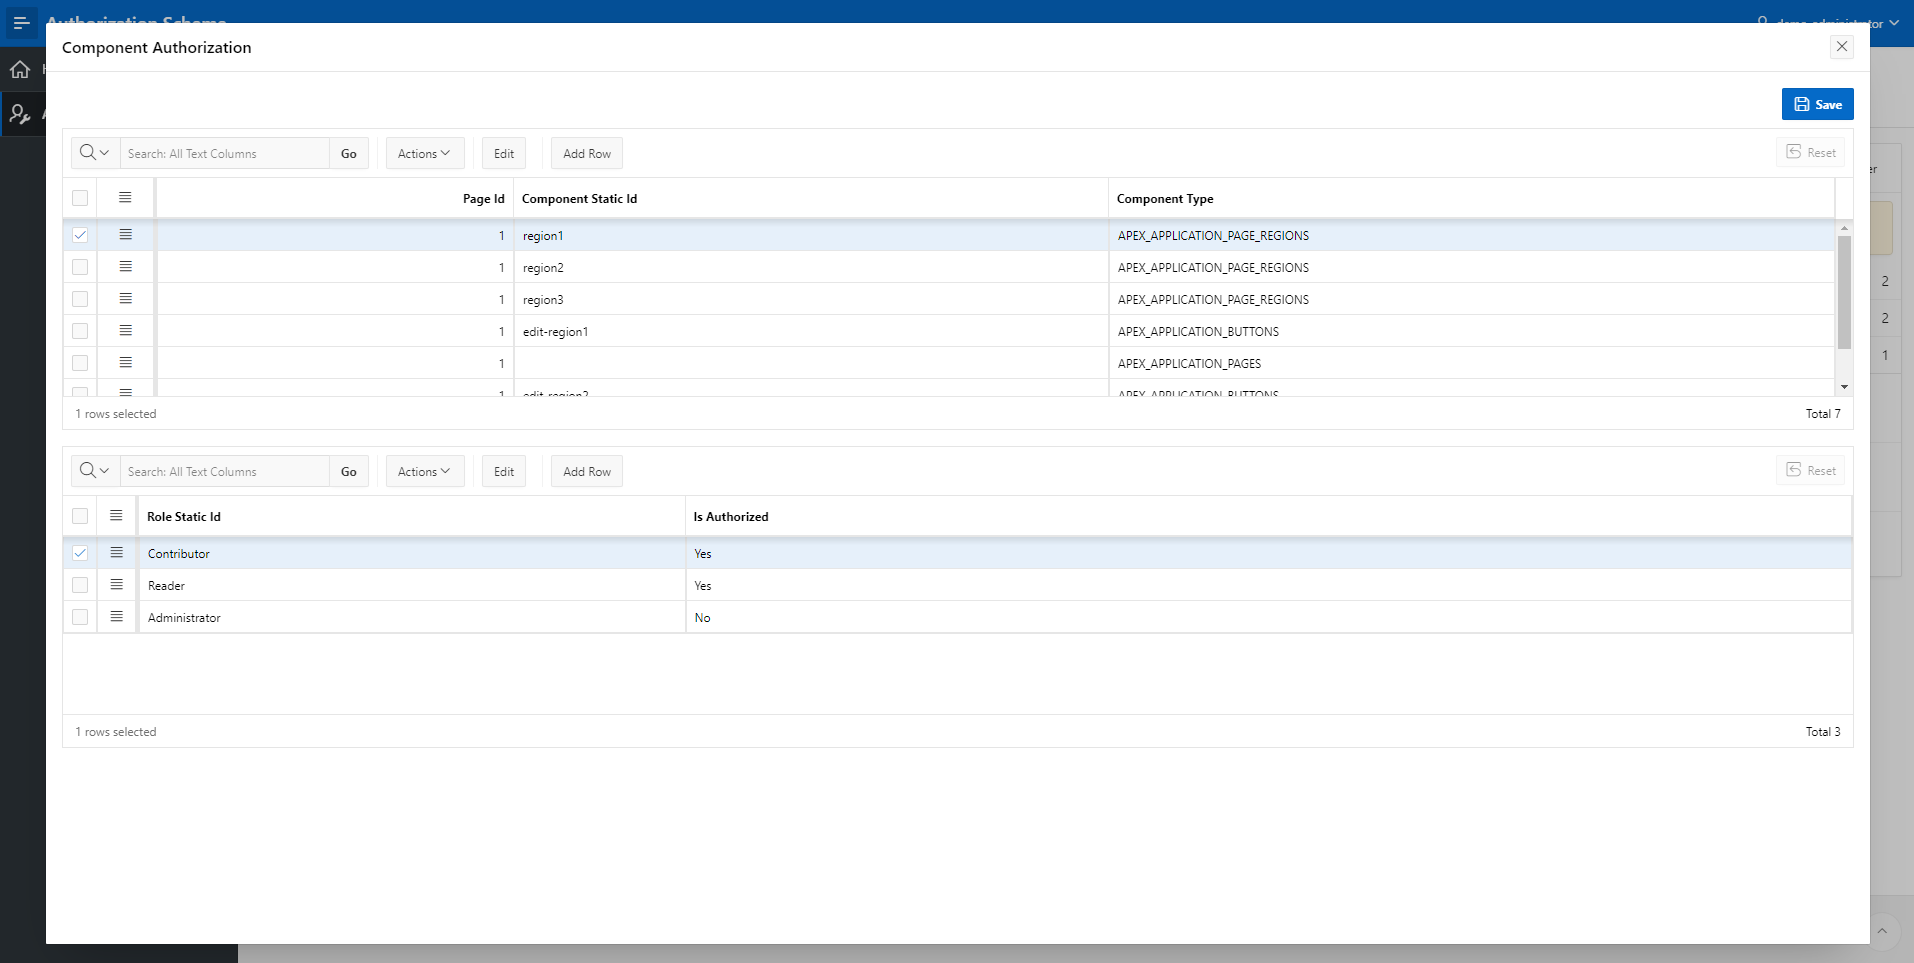 Screenshot showing the component authorization page with a master/detailed interactive grid allowing end user to toggle on/off the access to application components